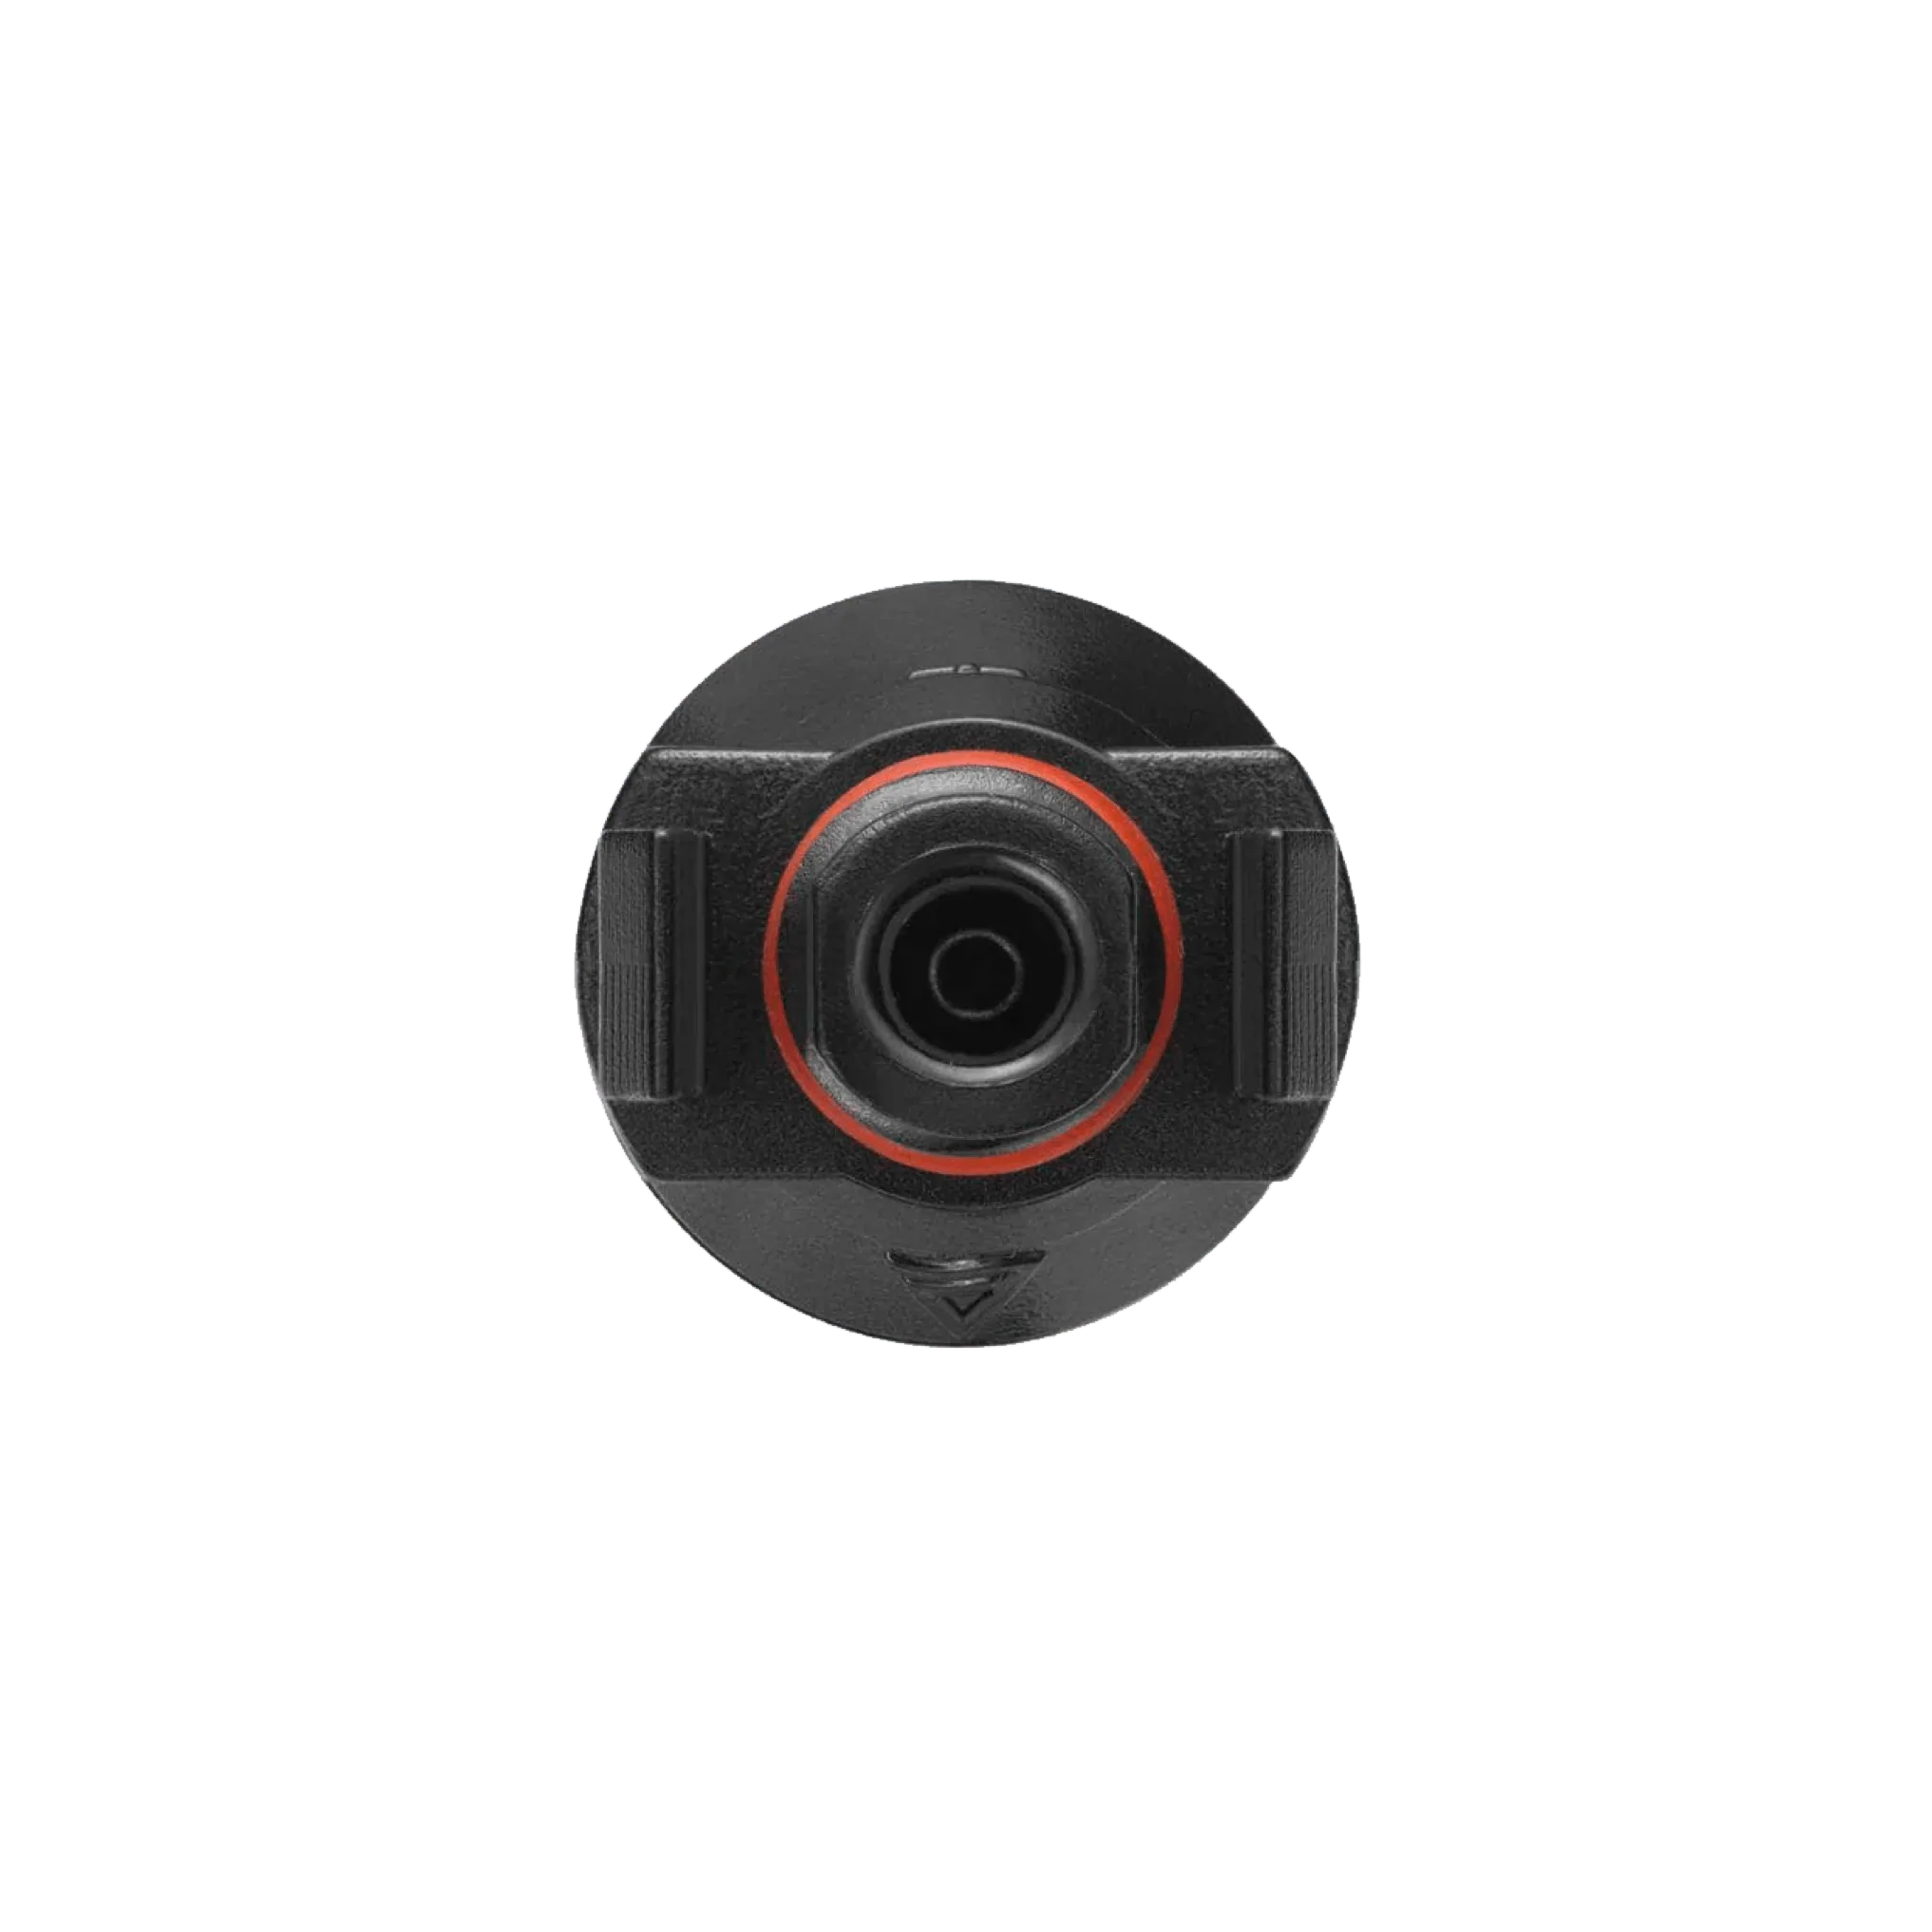 A black camera with a red lens on a white background, available for shipping in 1-2 weeks.